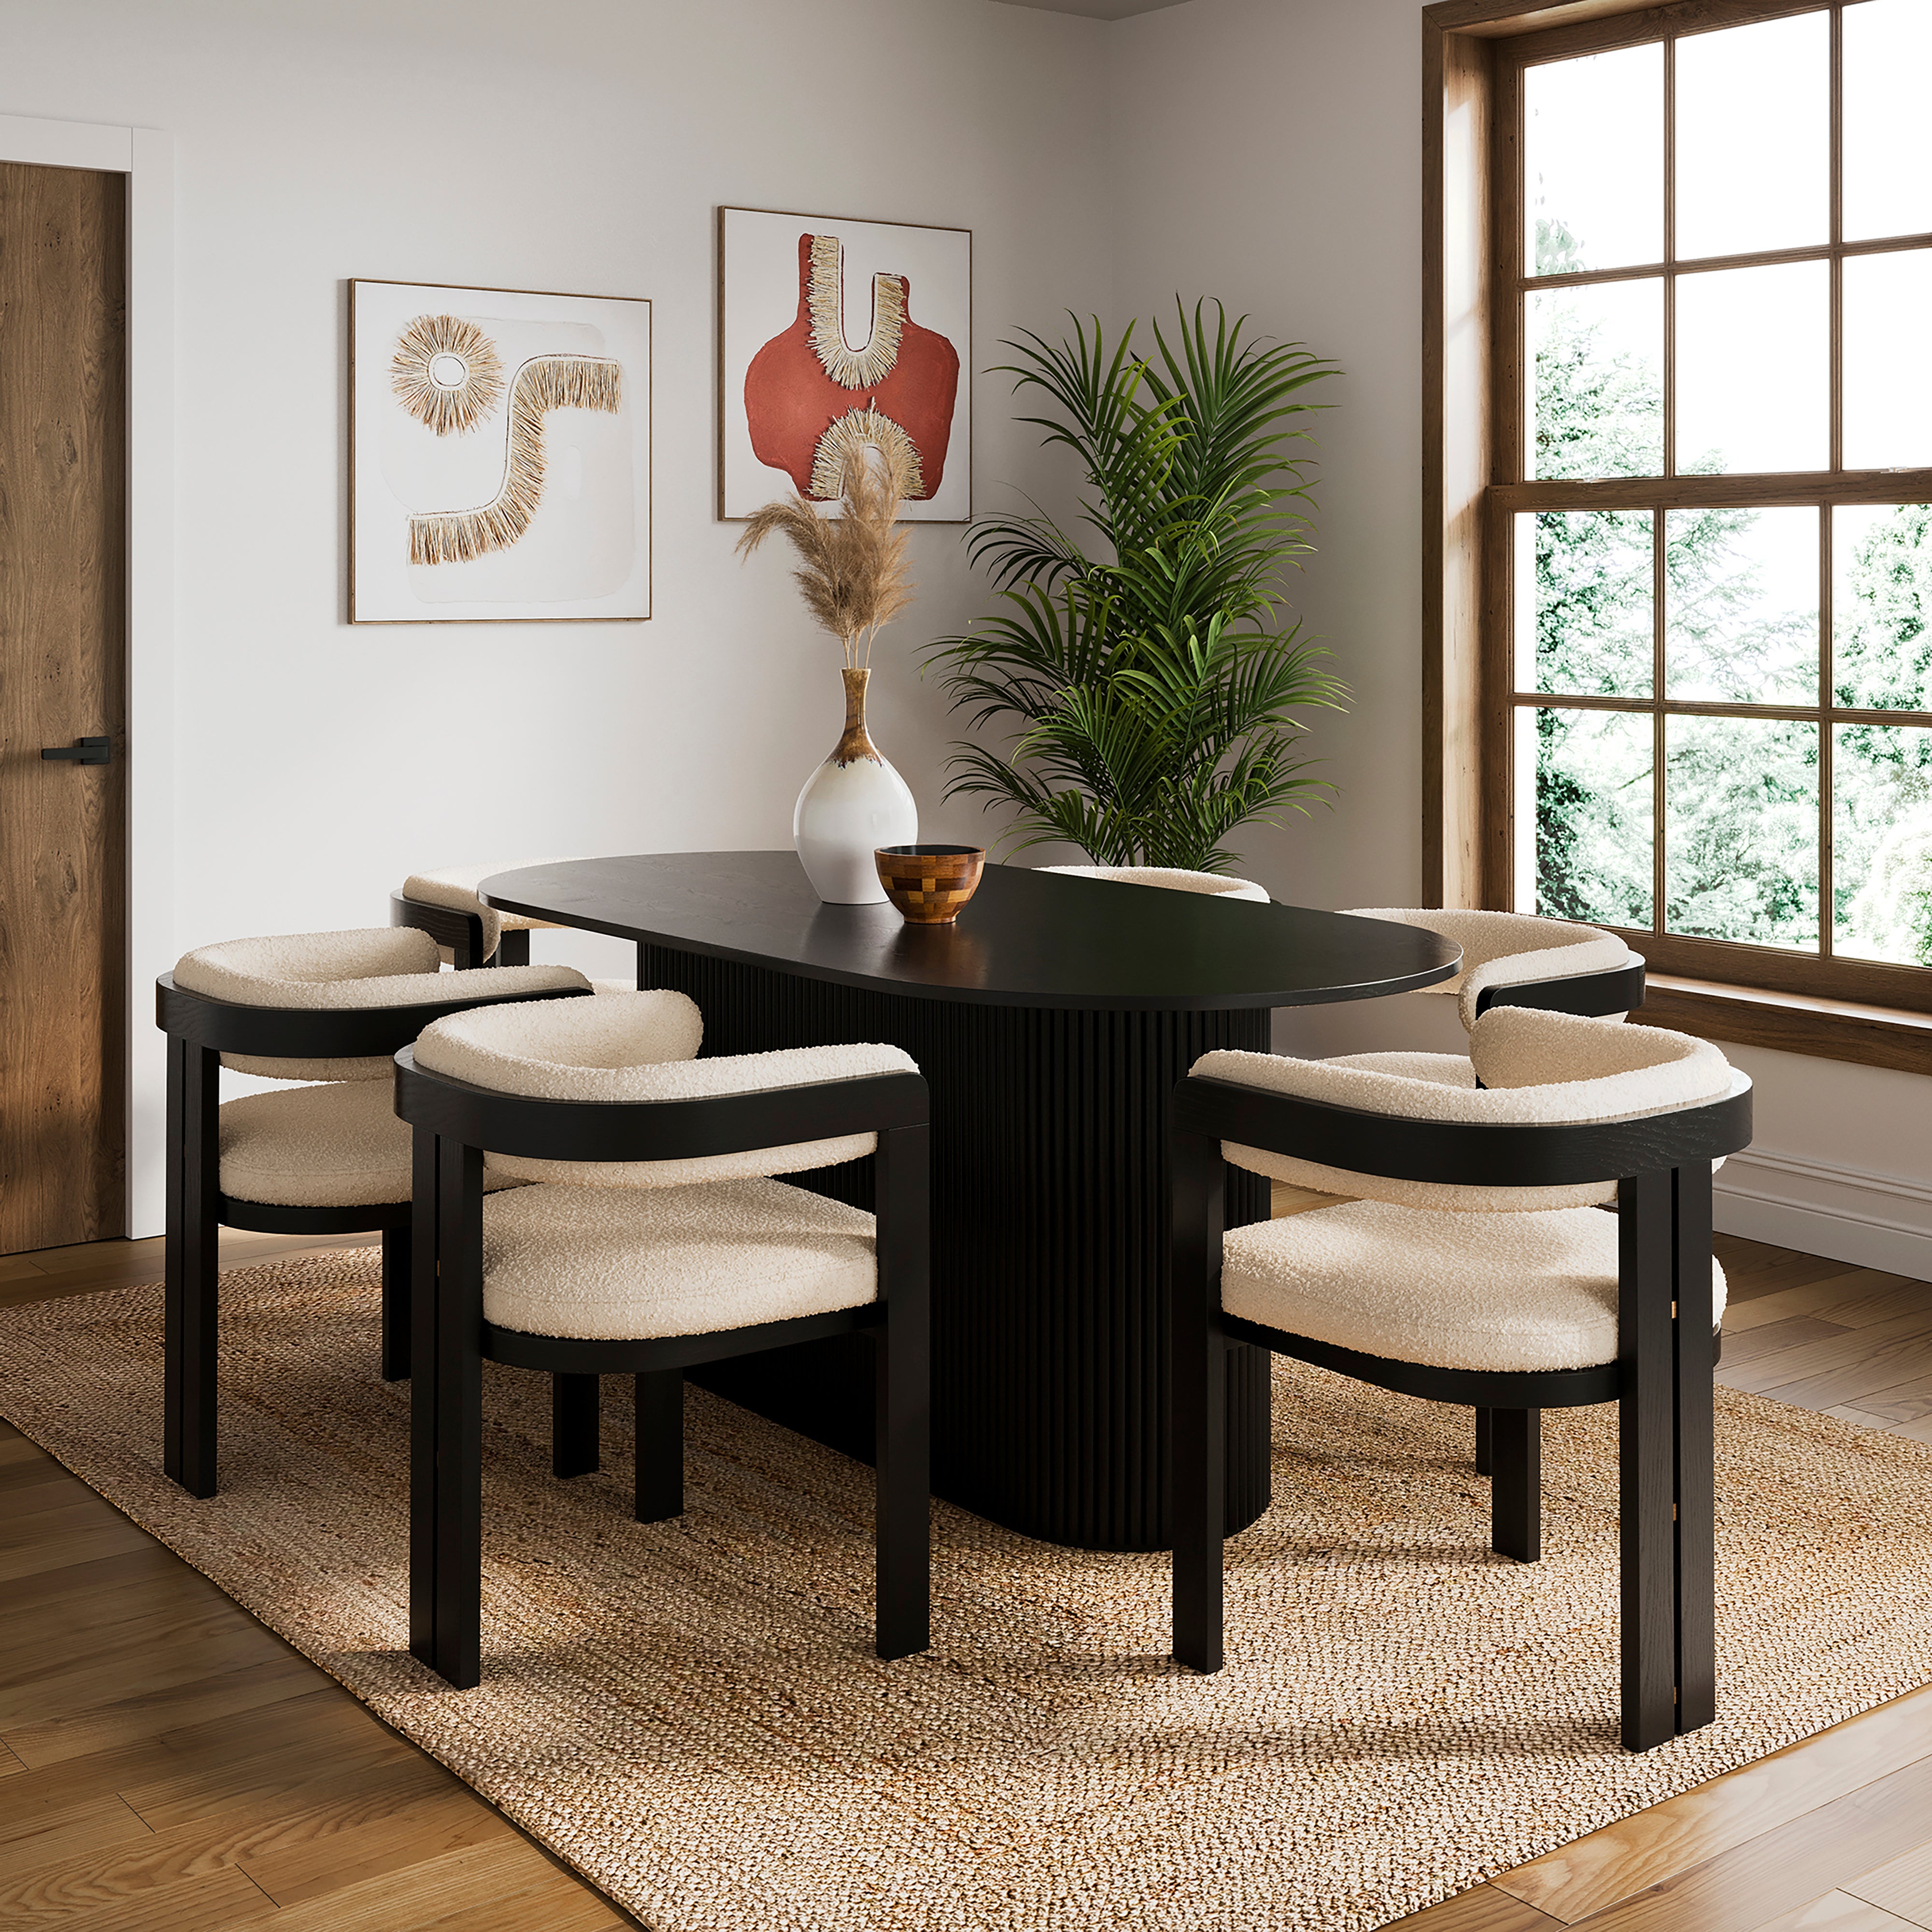 Amari 6 Seater Oval Dining Table